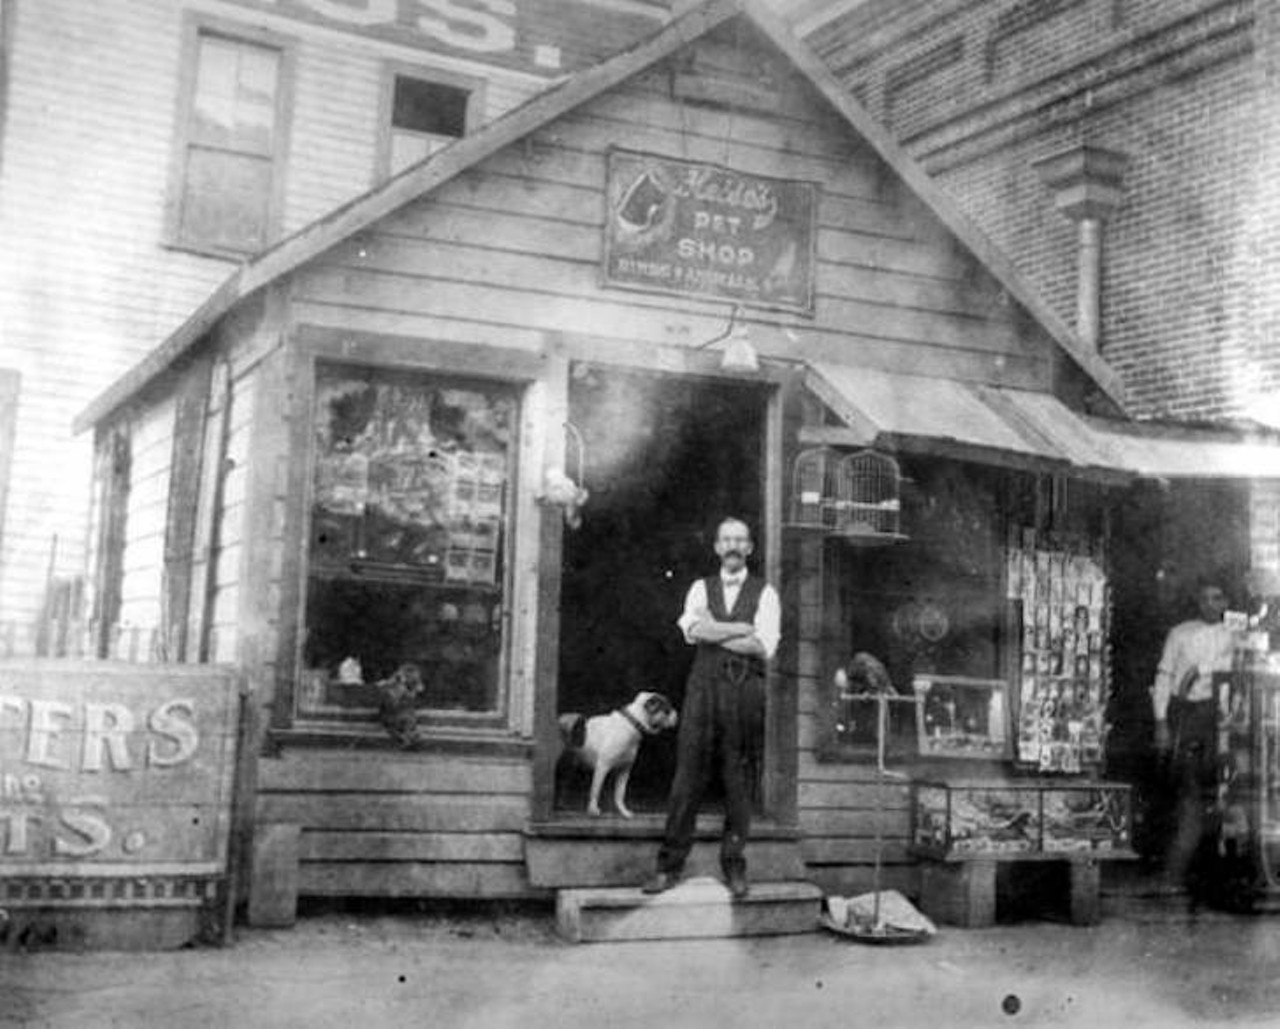 Heise's pet shop in Tampa, Florida, taken sometime in the 1900s.